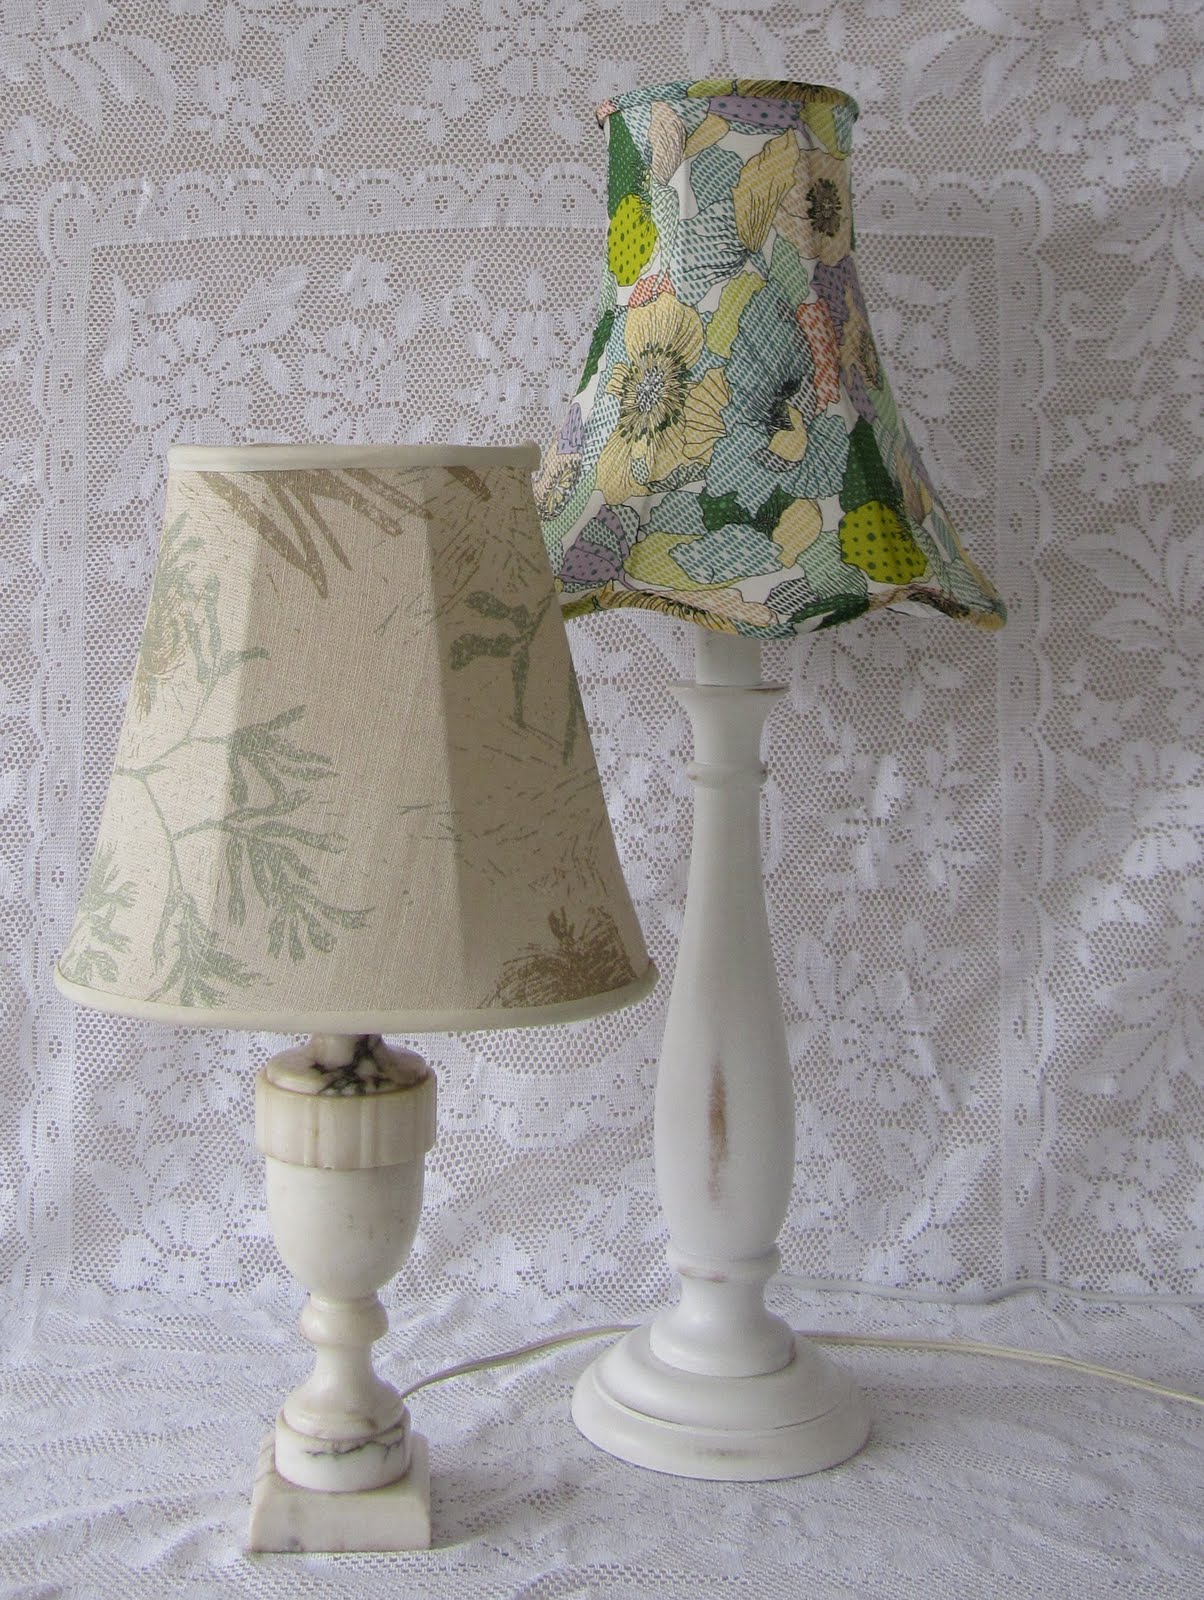 Lampshade Tutorial, How To Recover A Lined Fabric Lampshade